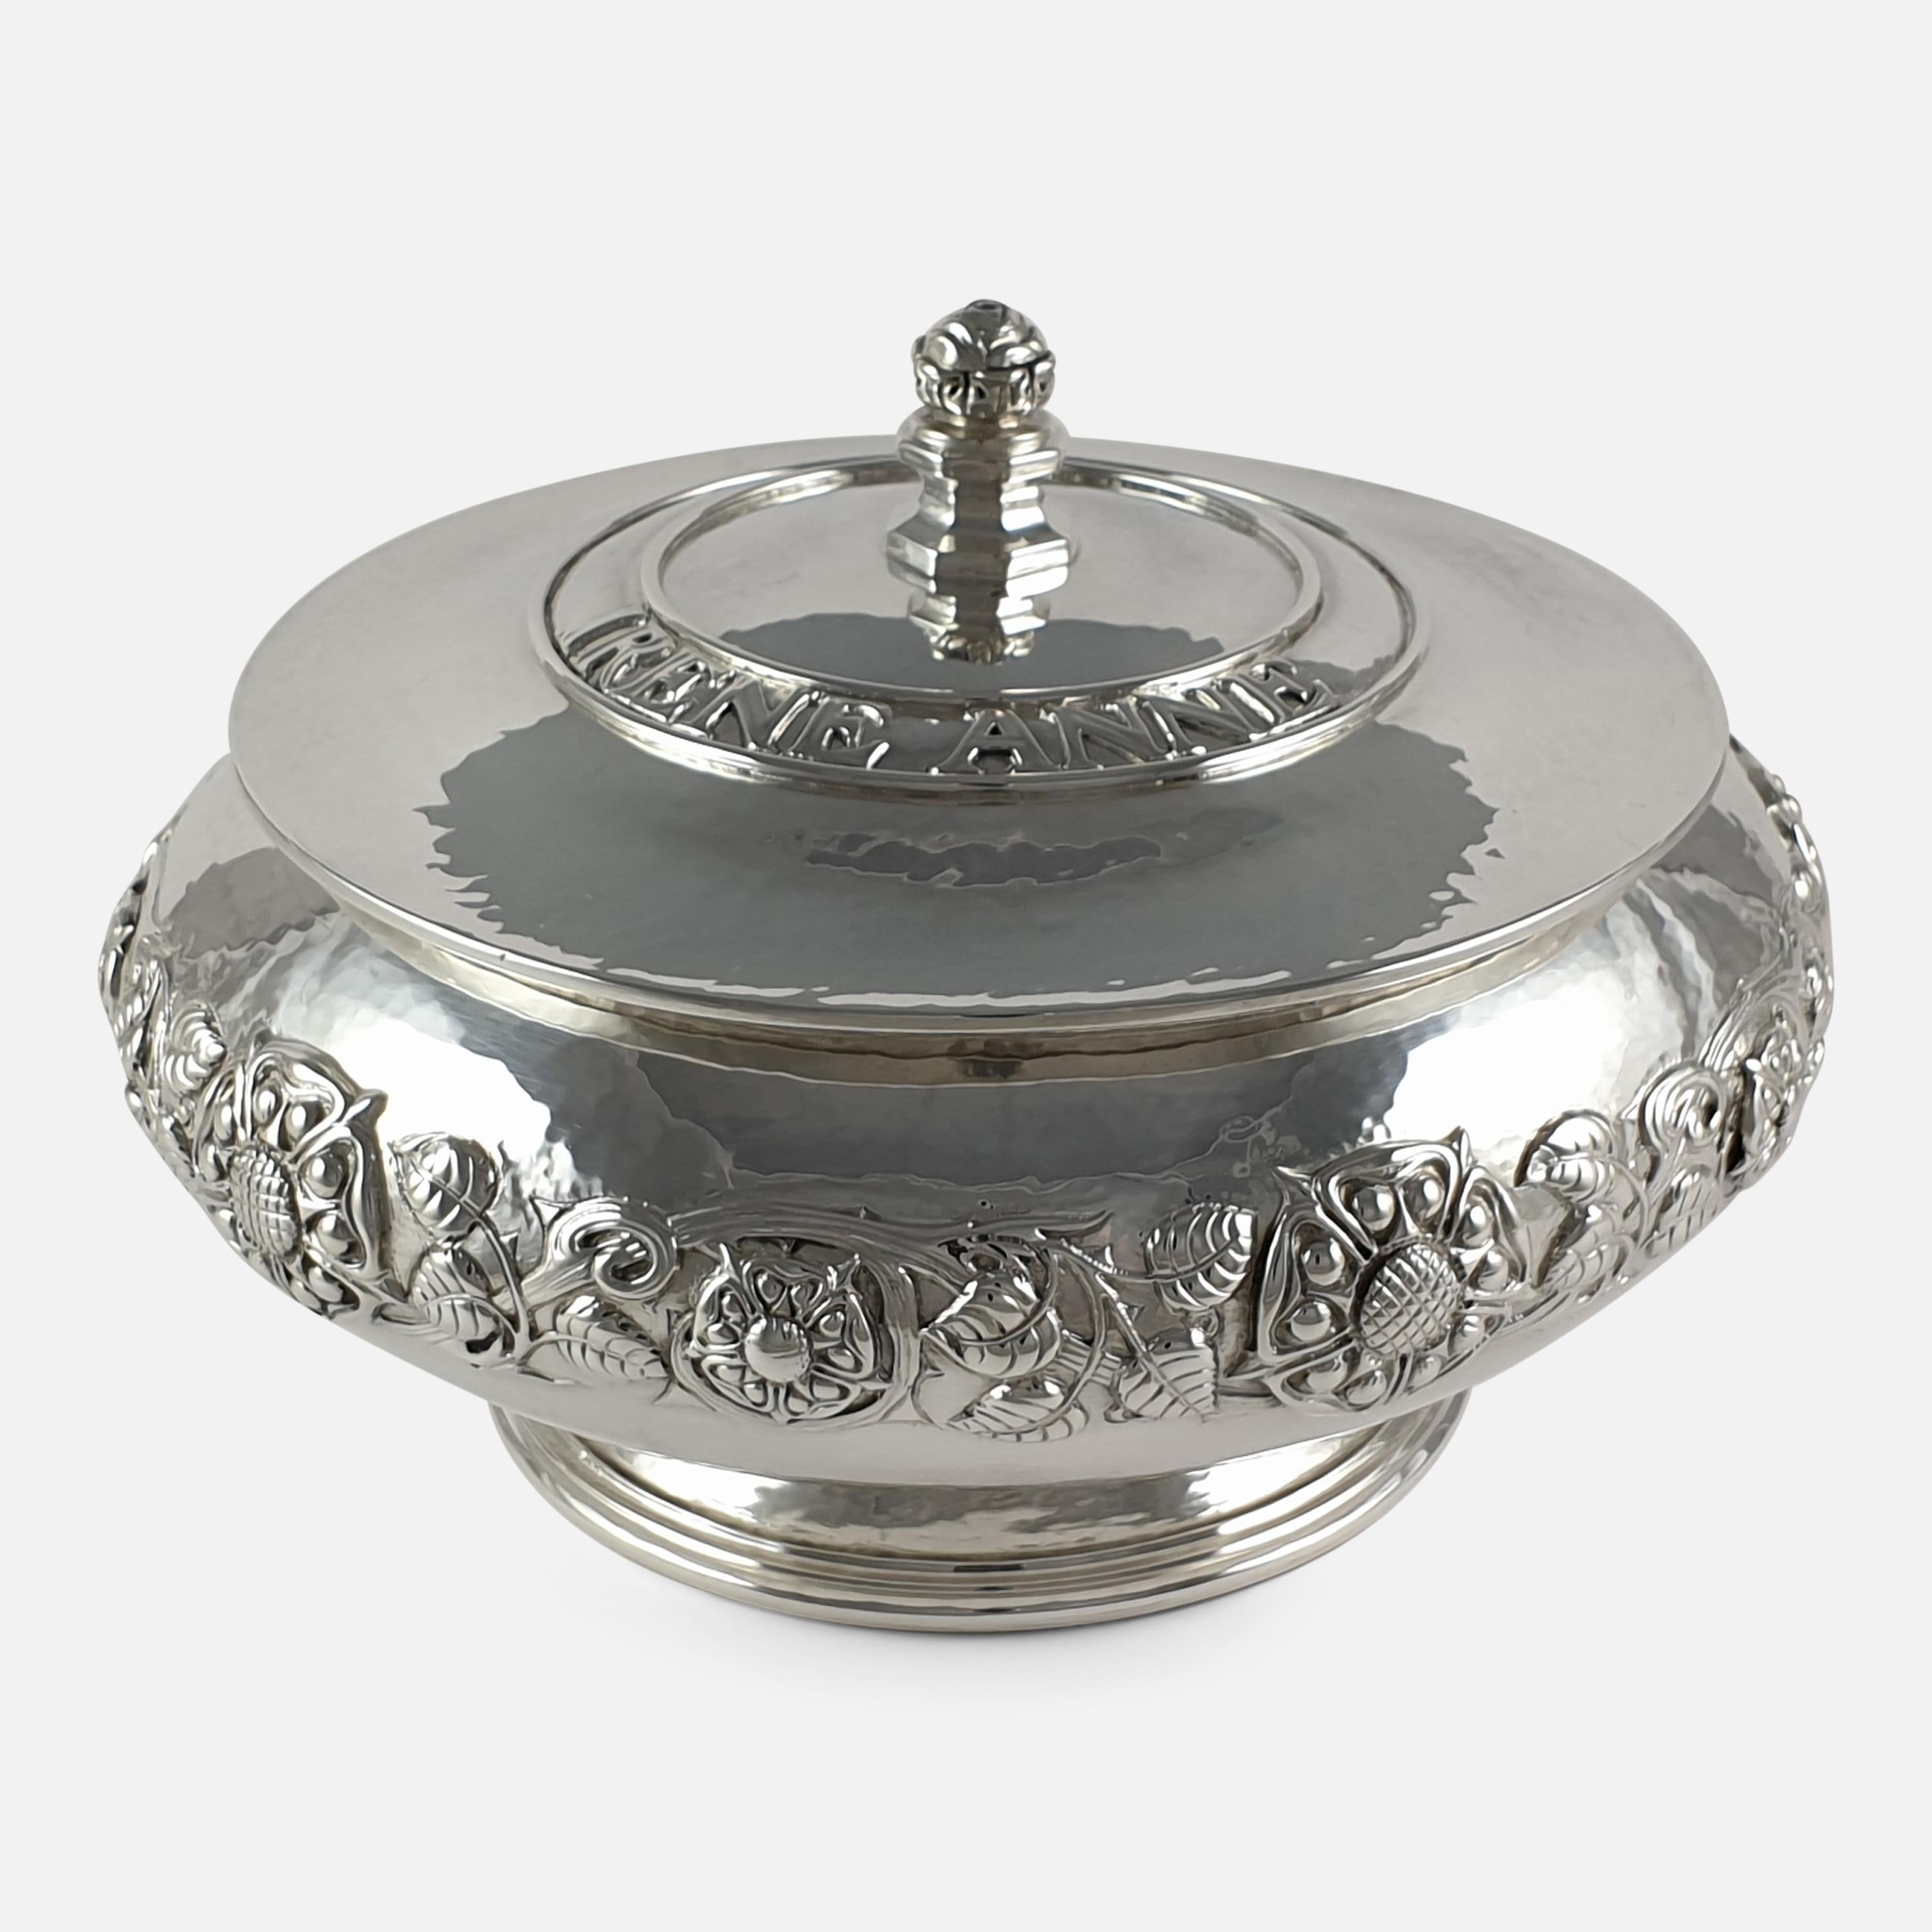 An Arts & Crafts style sterling silver bowl with cover made by Omar Ramsden. The cover is set with a rose finial and the applied inscription 